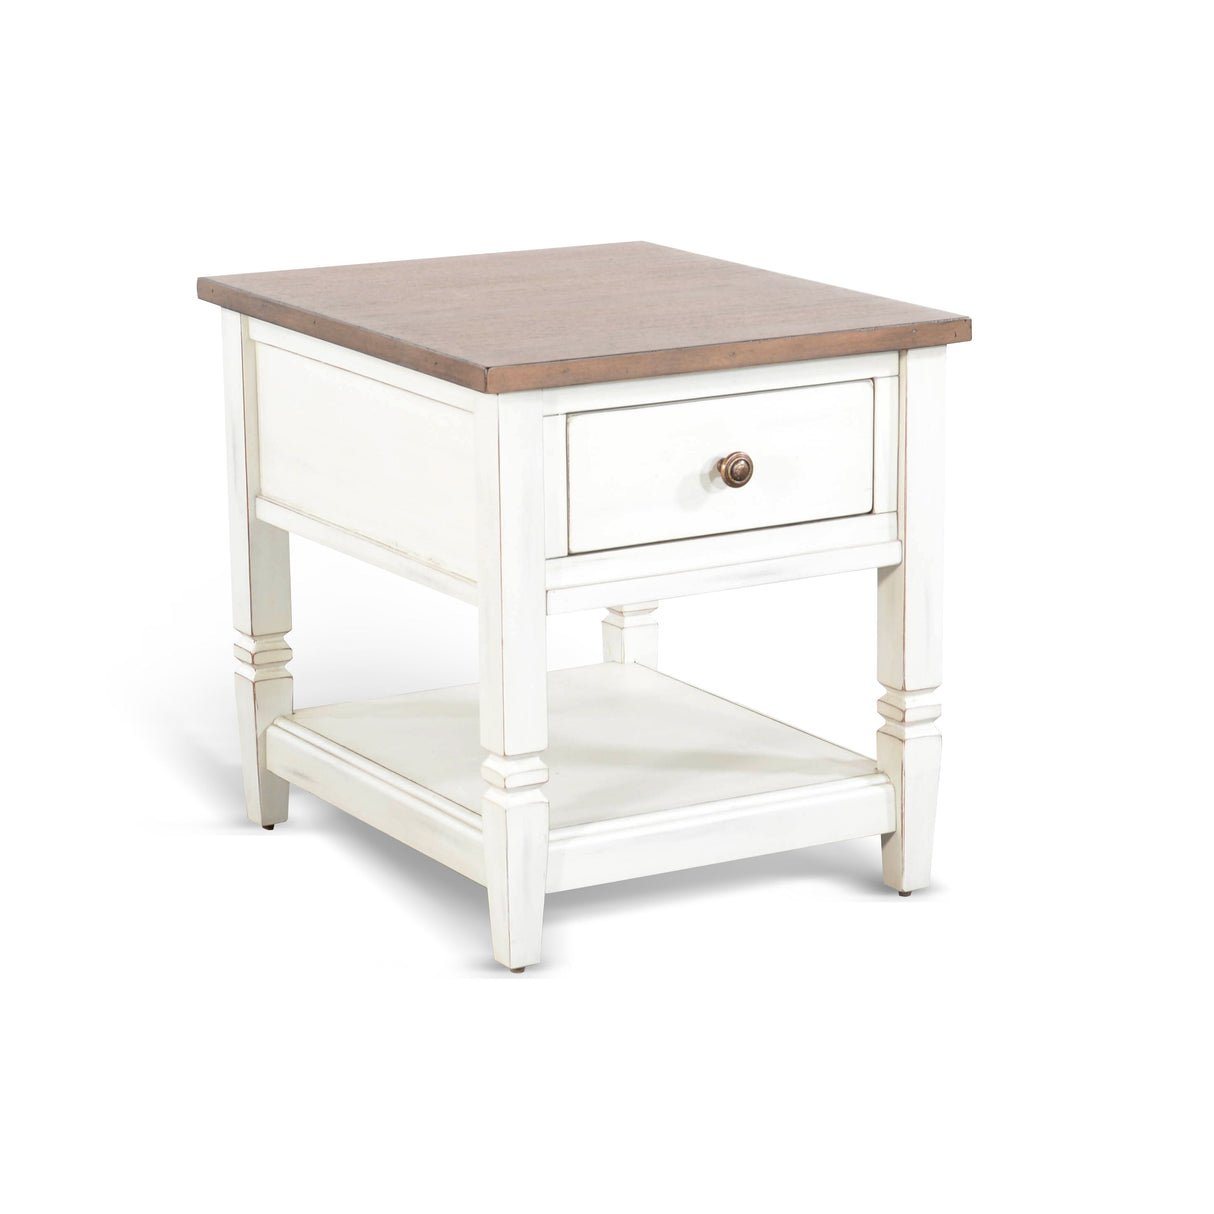 End Table - White / Light Brown